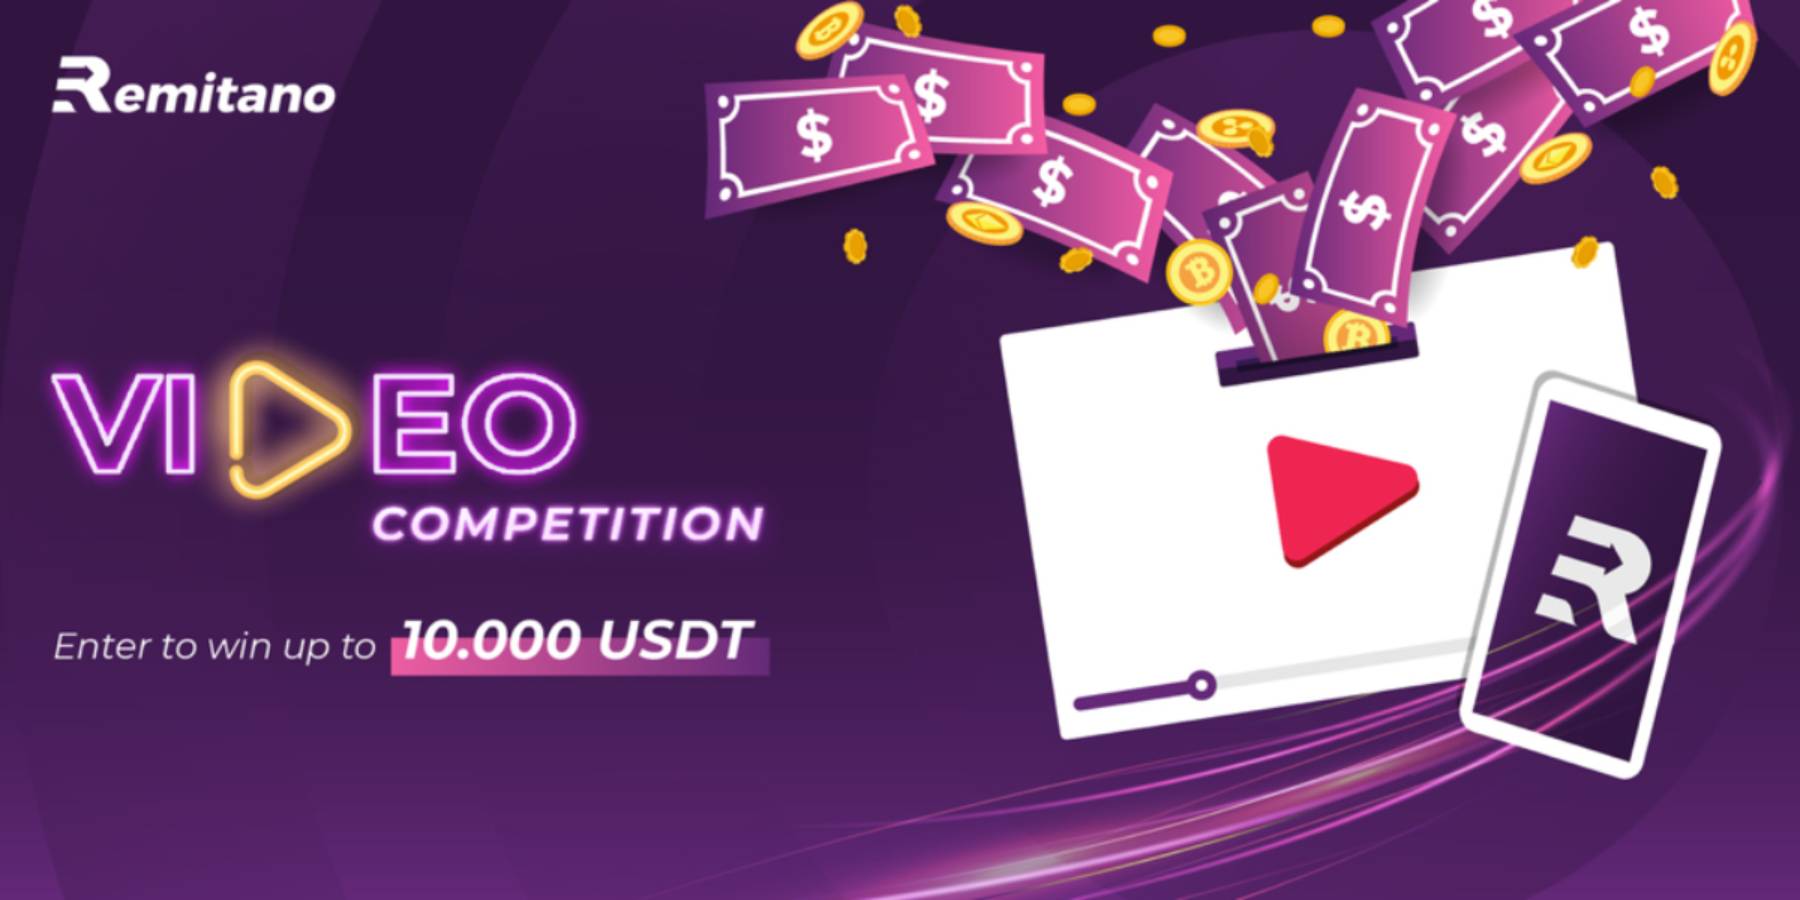 Remitano Lightning League – YouTube Video Competition – Win 10K USDT